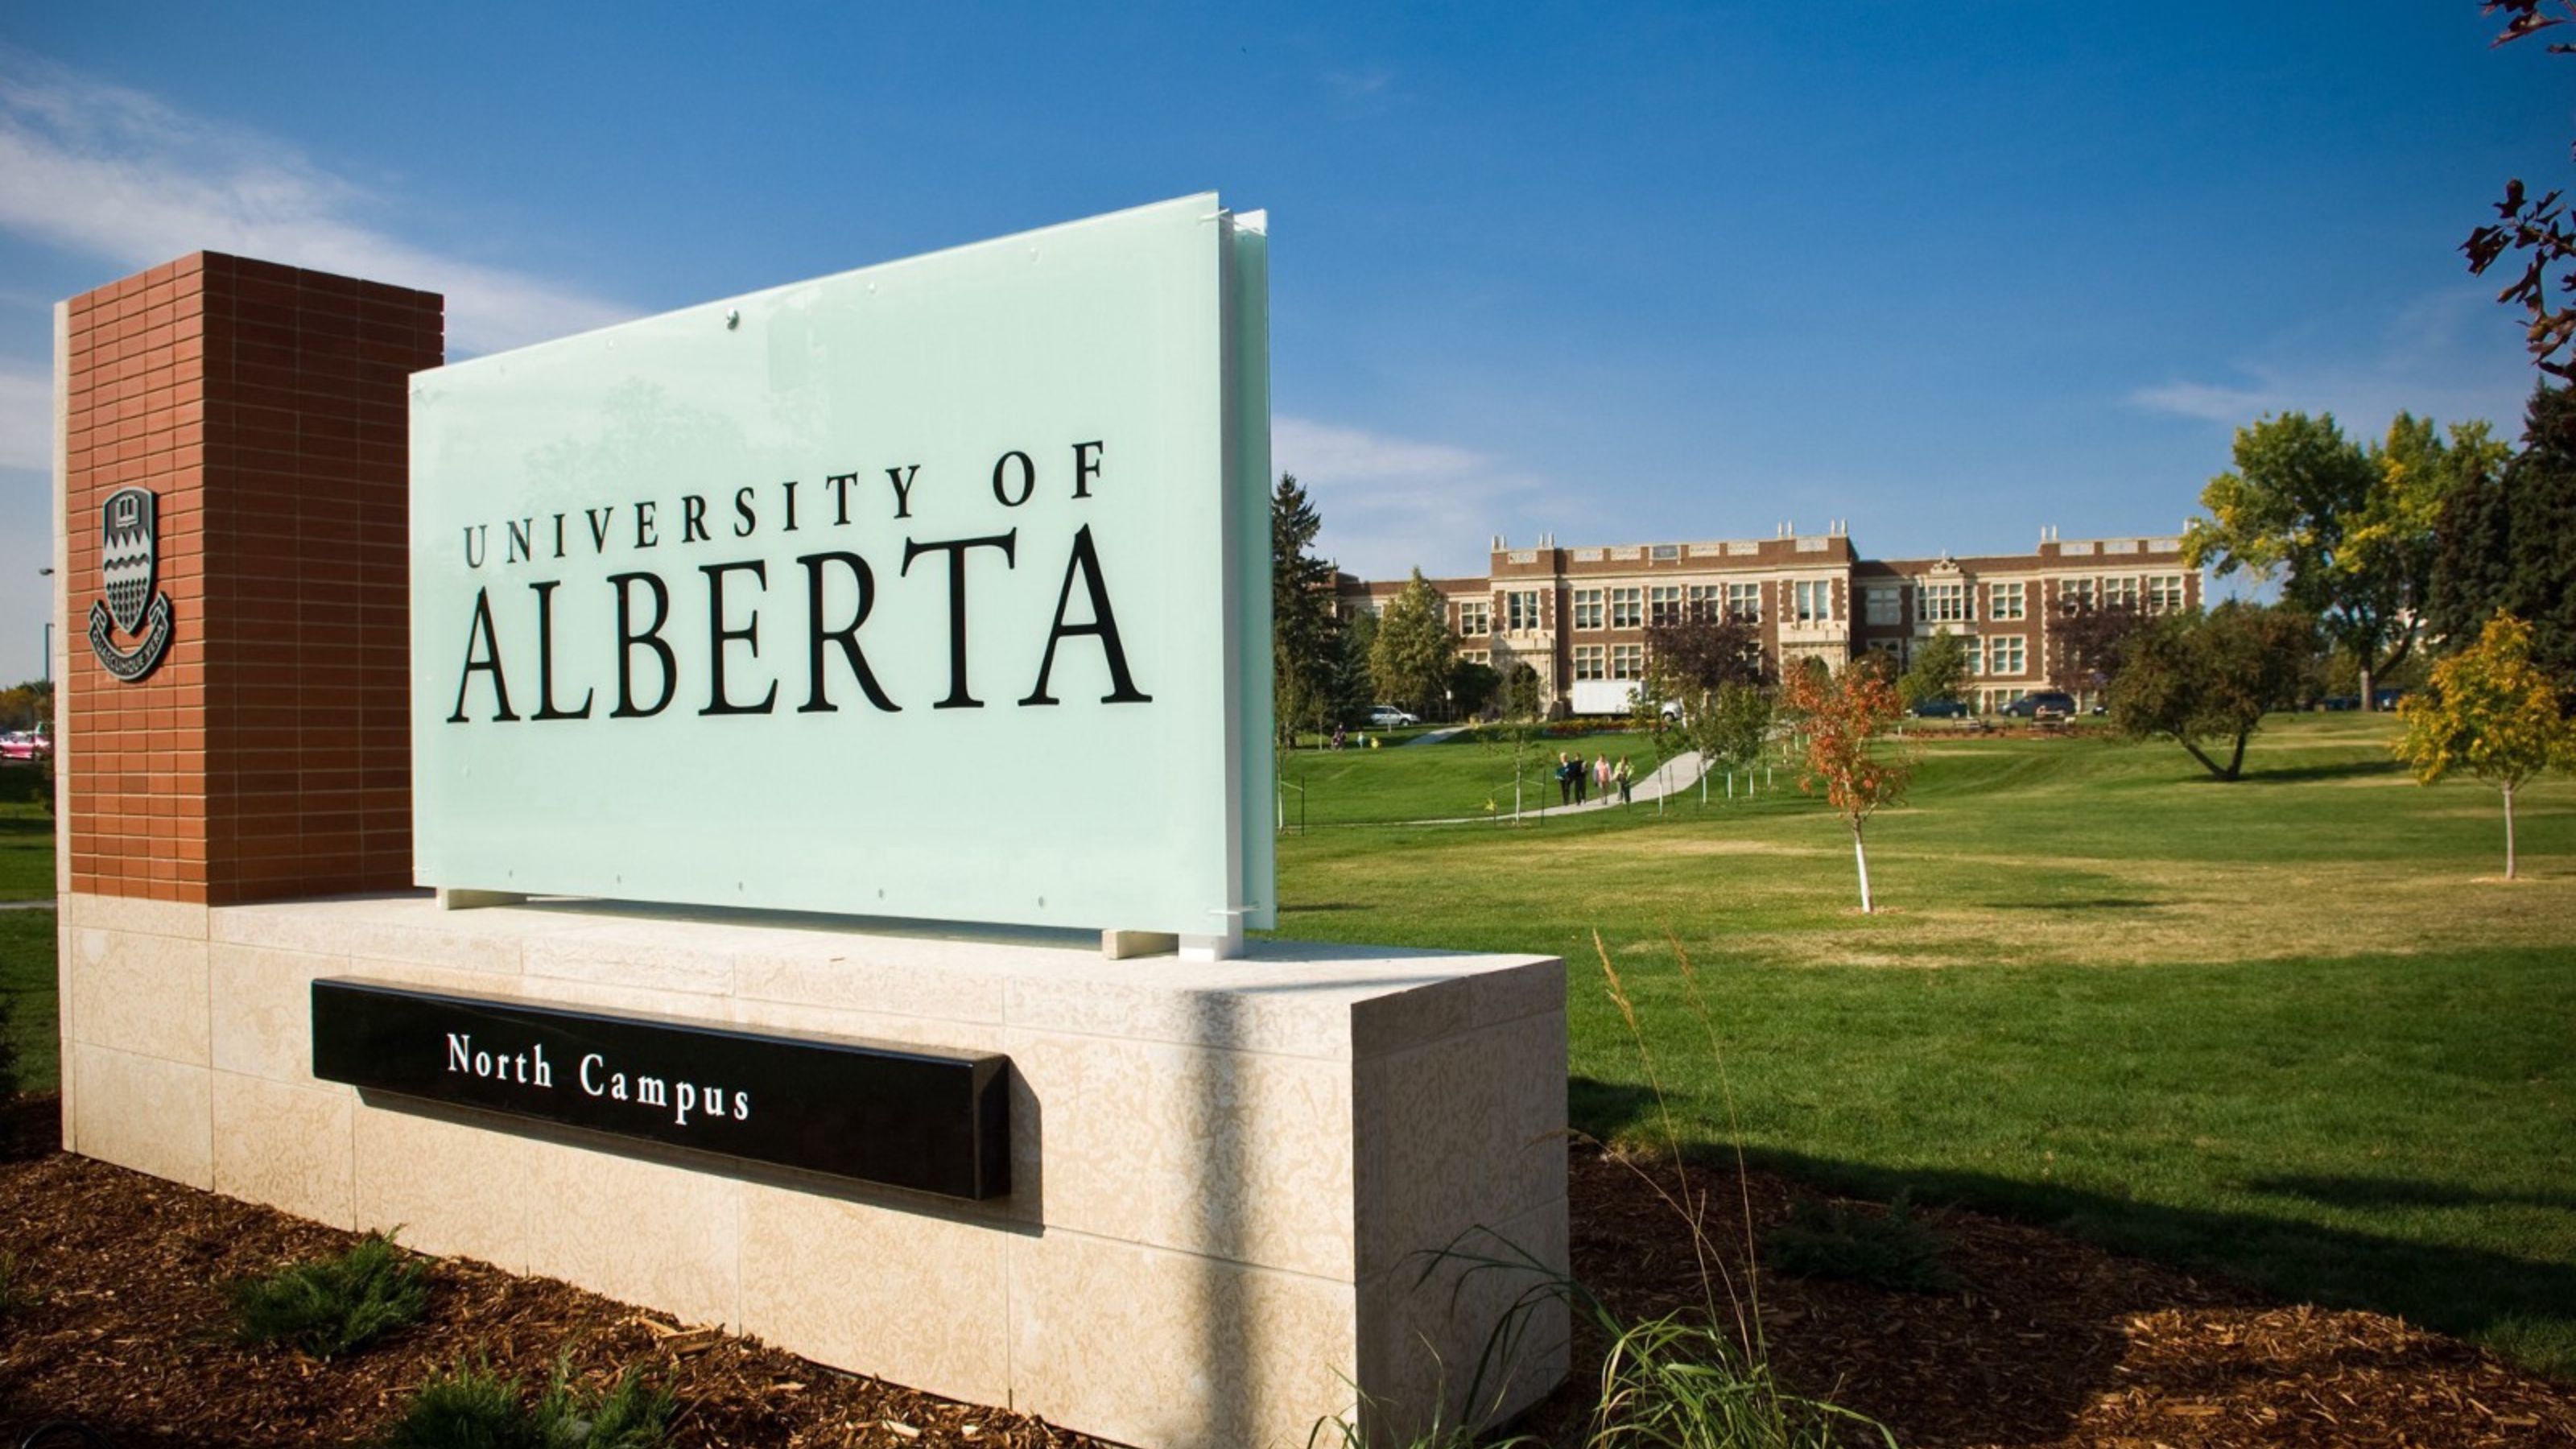 U of A welcome sign, North Campus